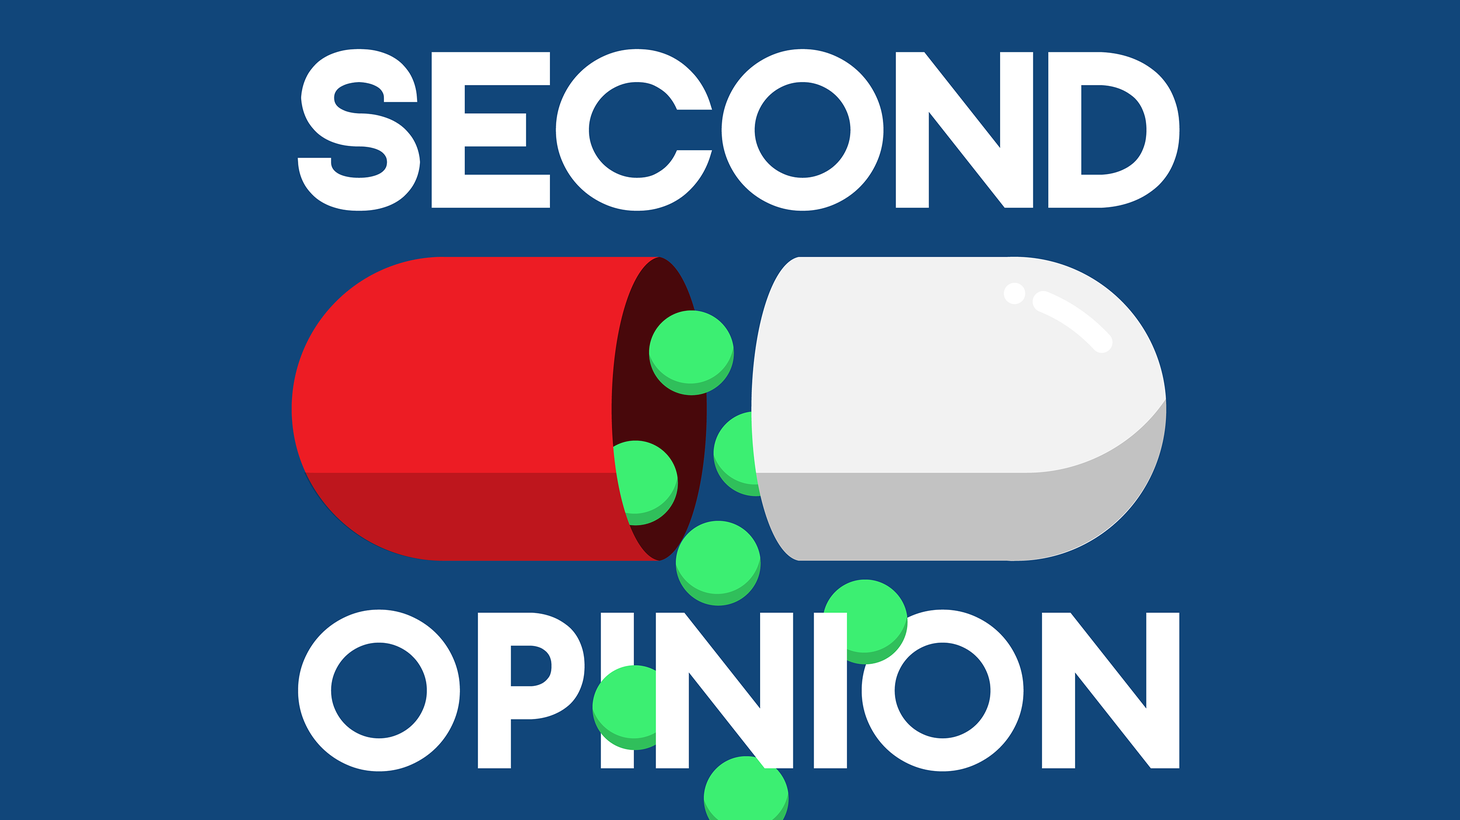 Why can't we develop a fair, honest and unbiased way to conduct research on the effectiveness and safety of medications?